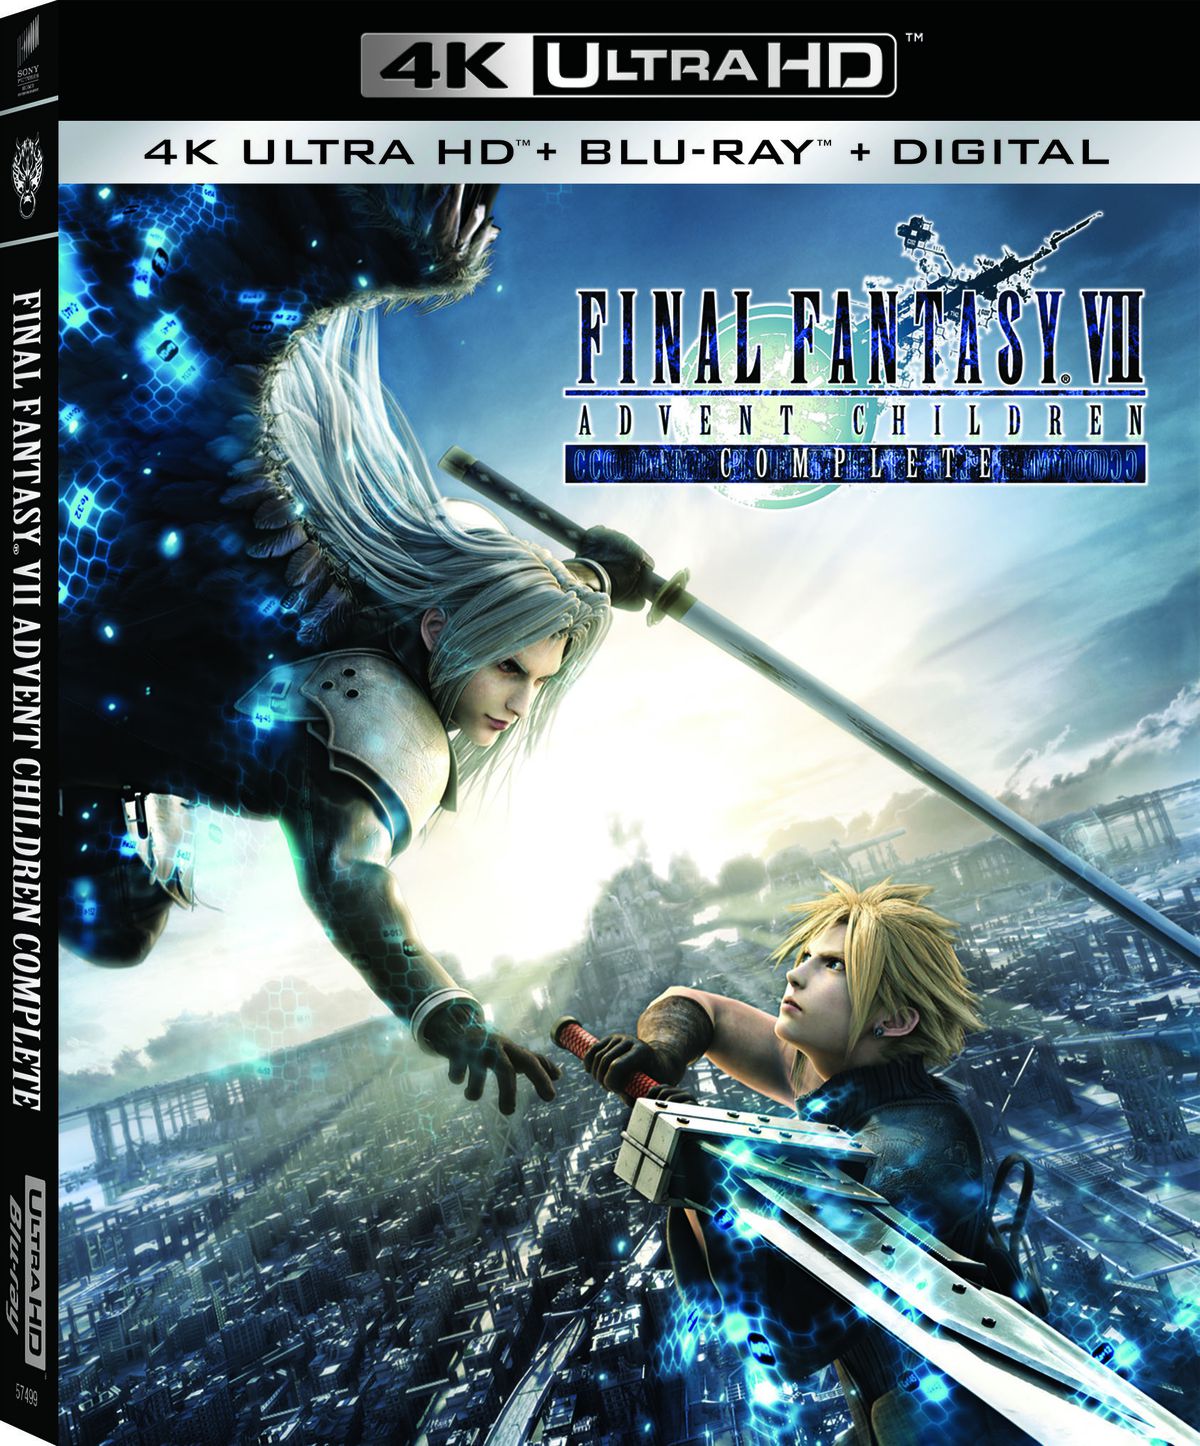 The cover art for Final Fantasy 7: Advent Children’s 4K Blu-ray rerelease